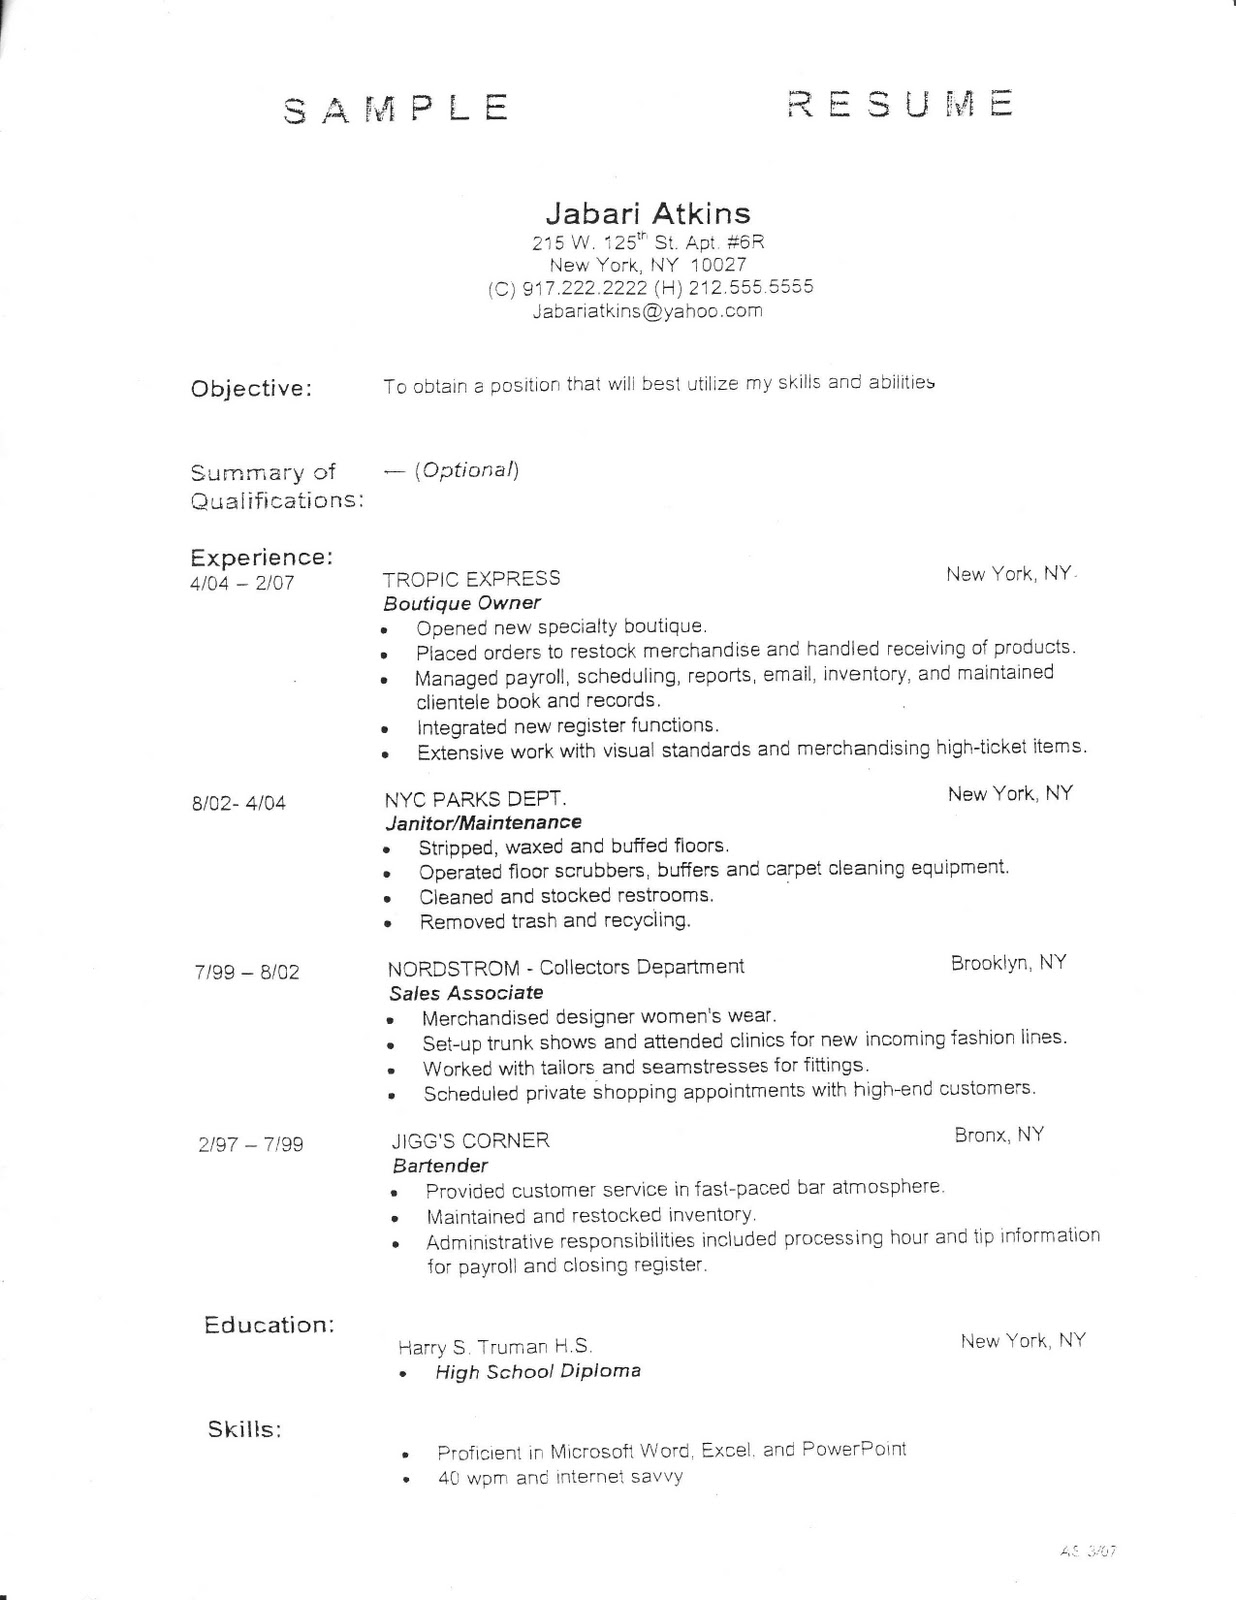 Job search results online resume